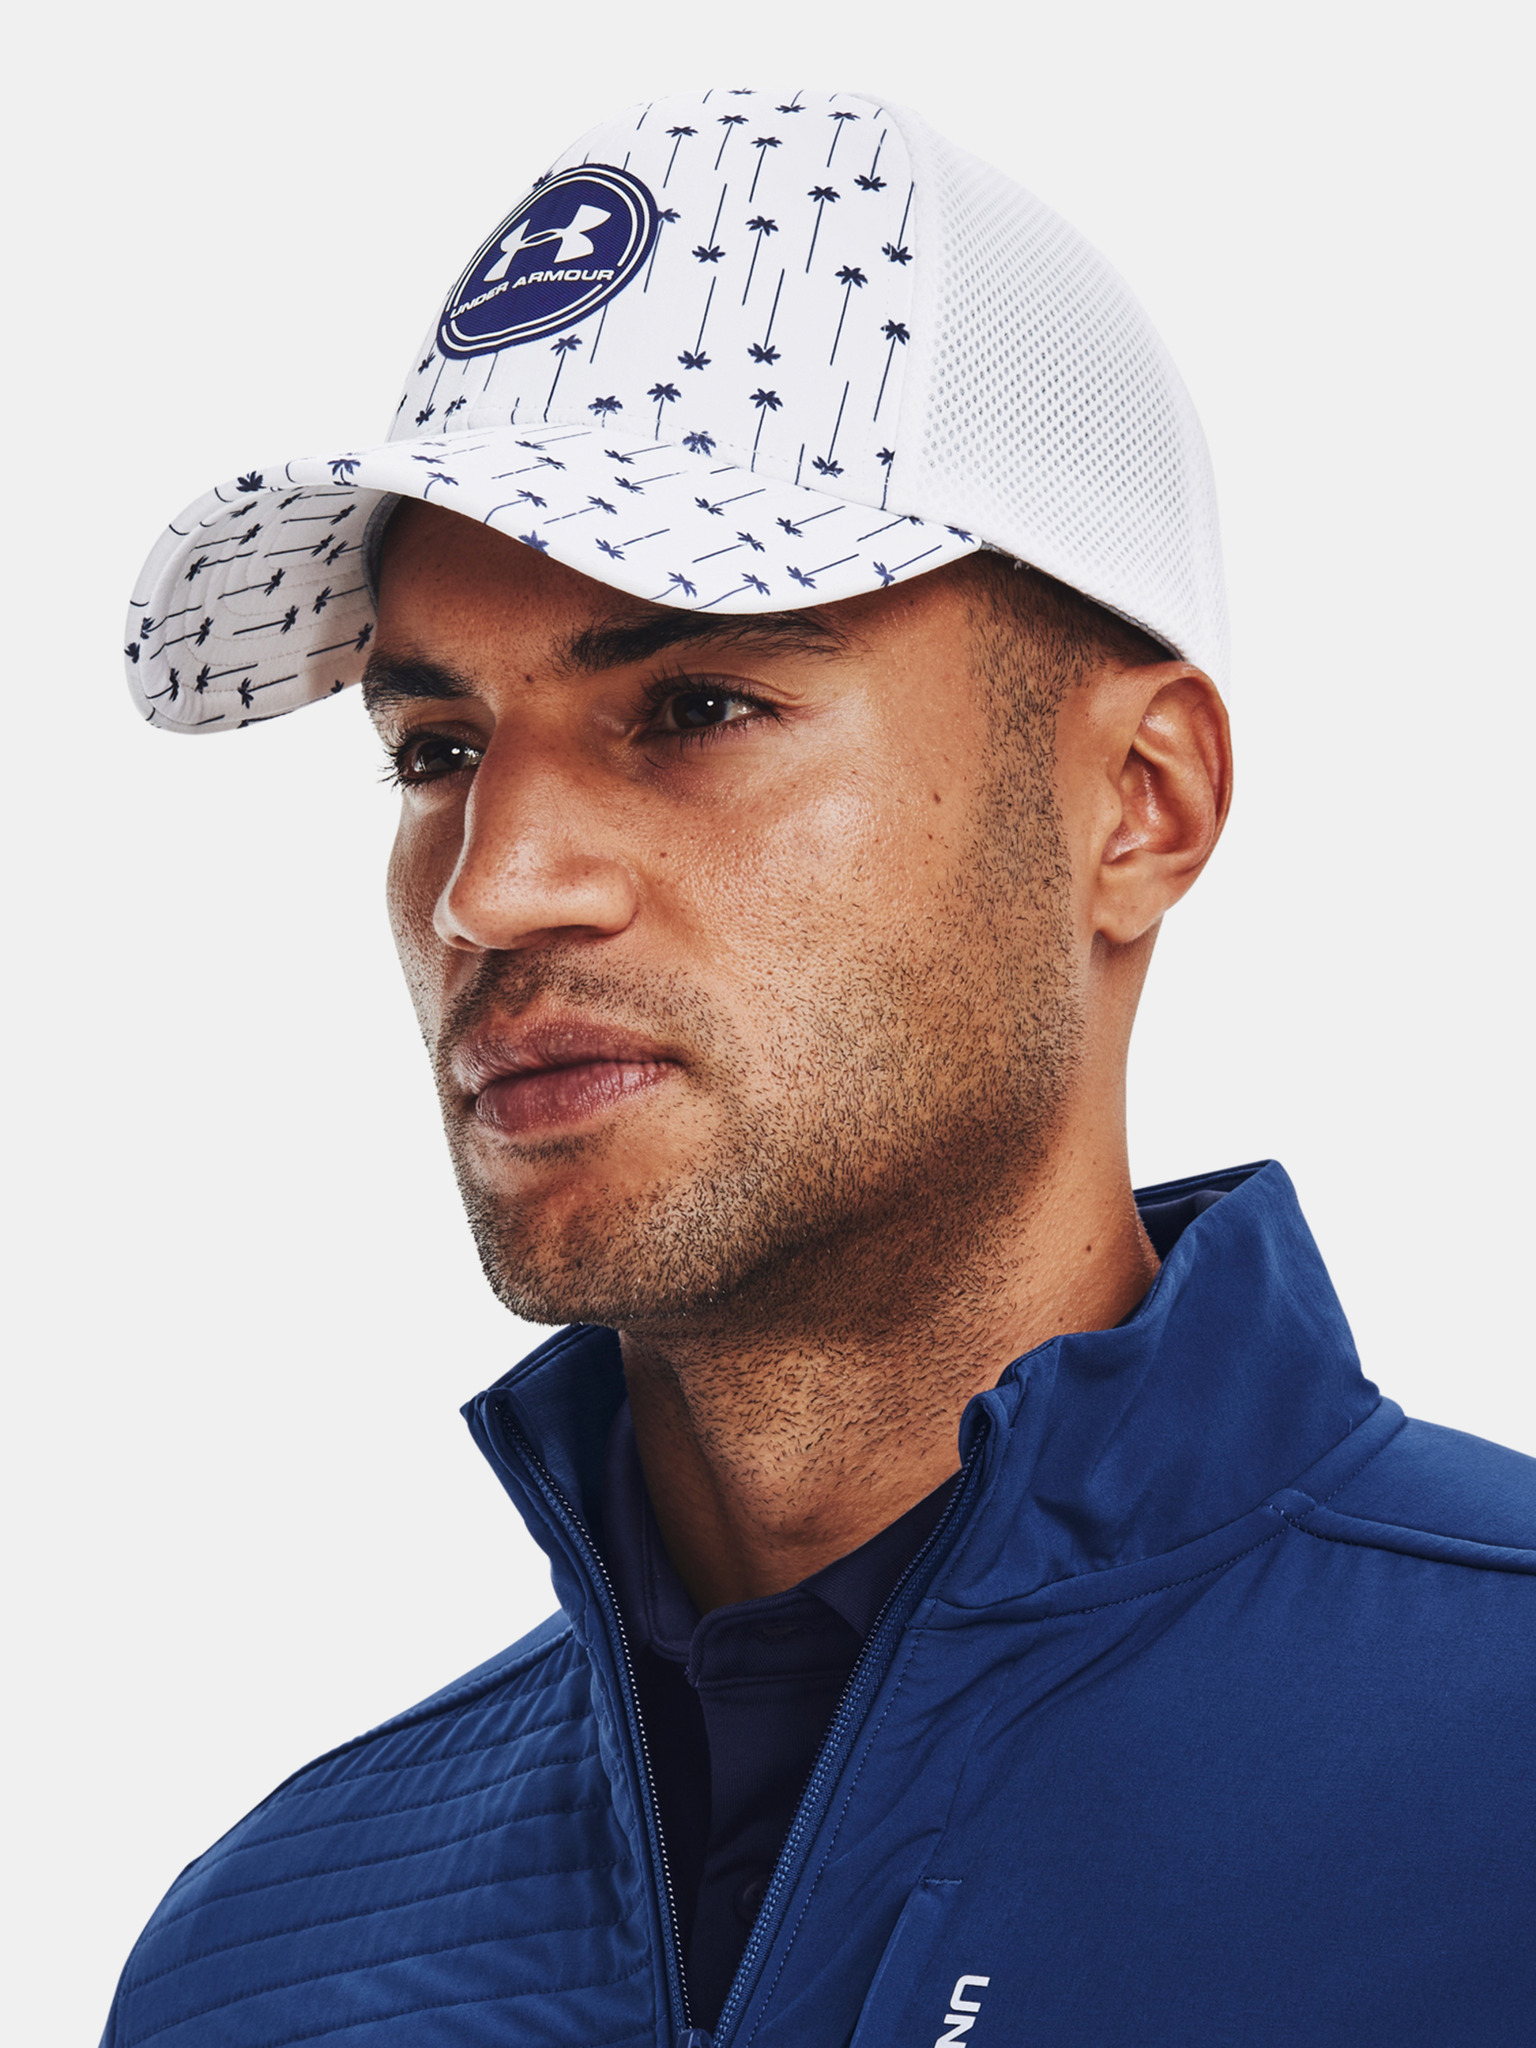 Under Armour - Iso-Chill Driver Mesh Cap